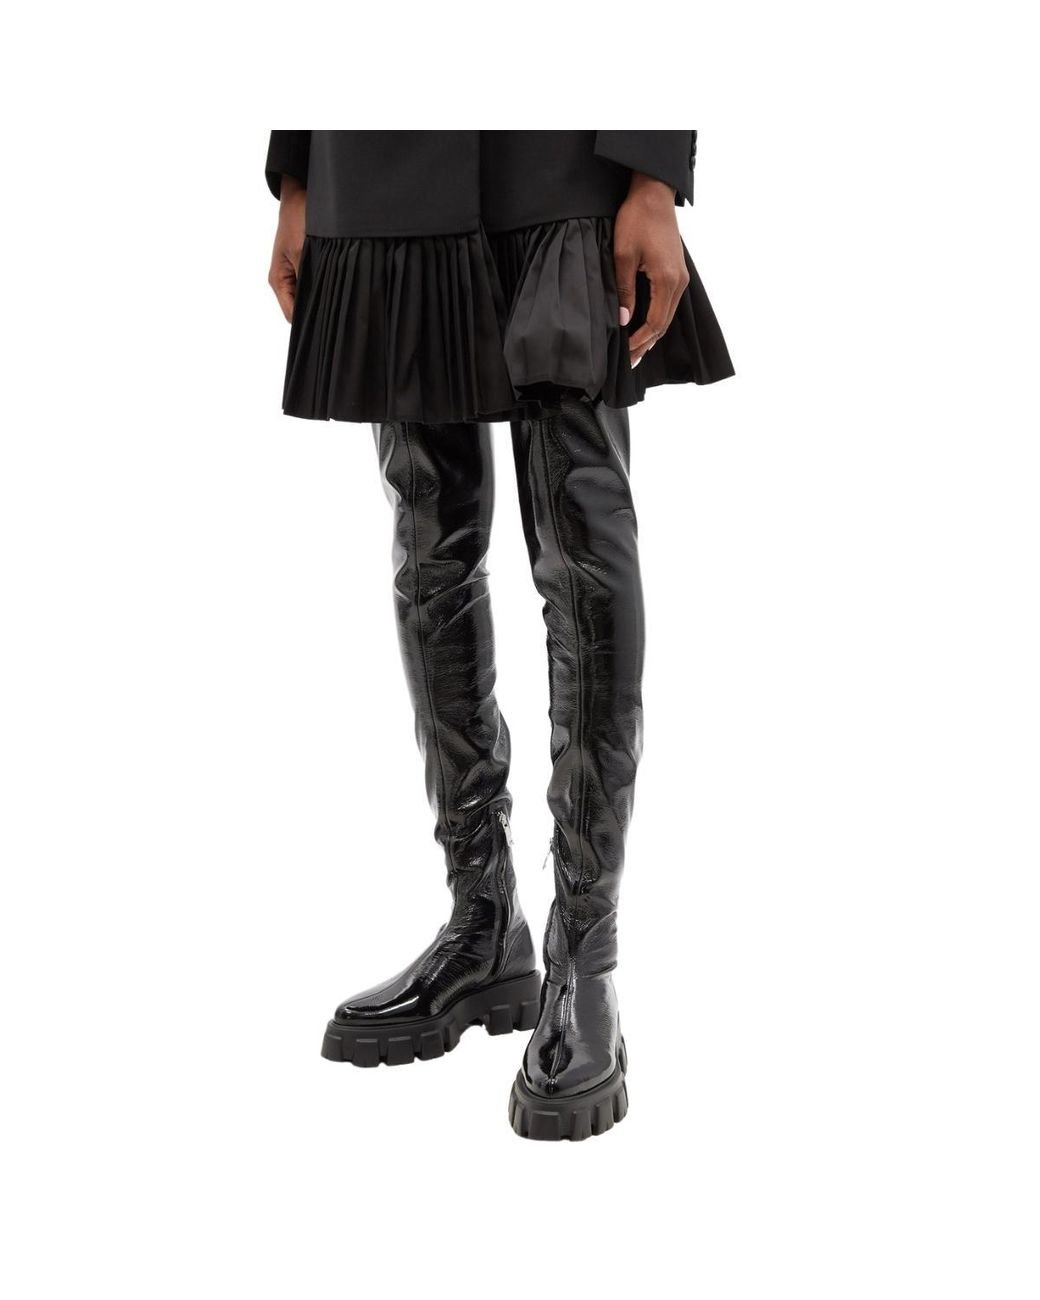 Prada Monolith Patent-leather Boots in Black | Lyst